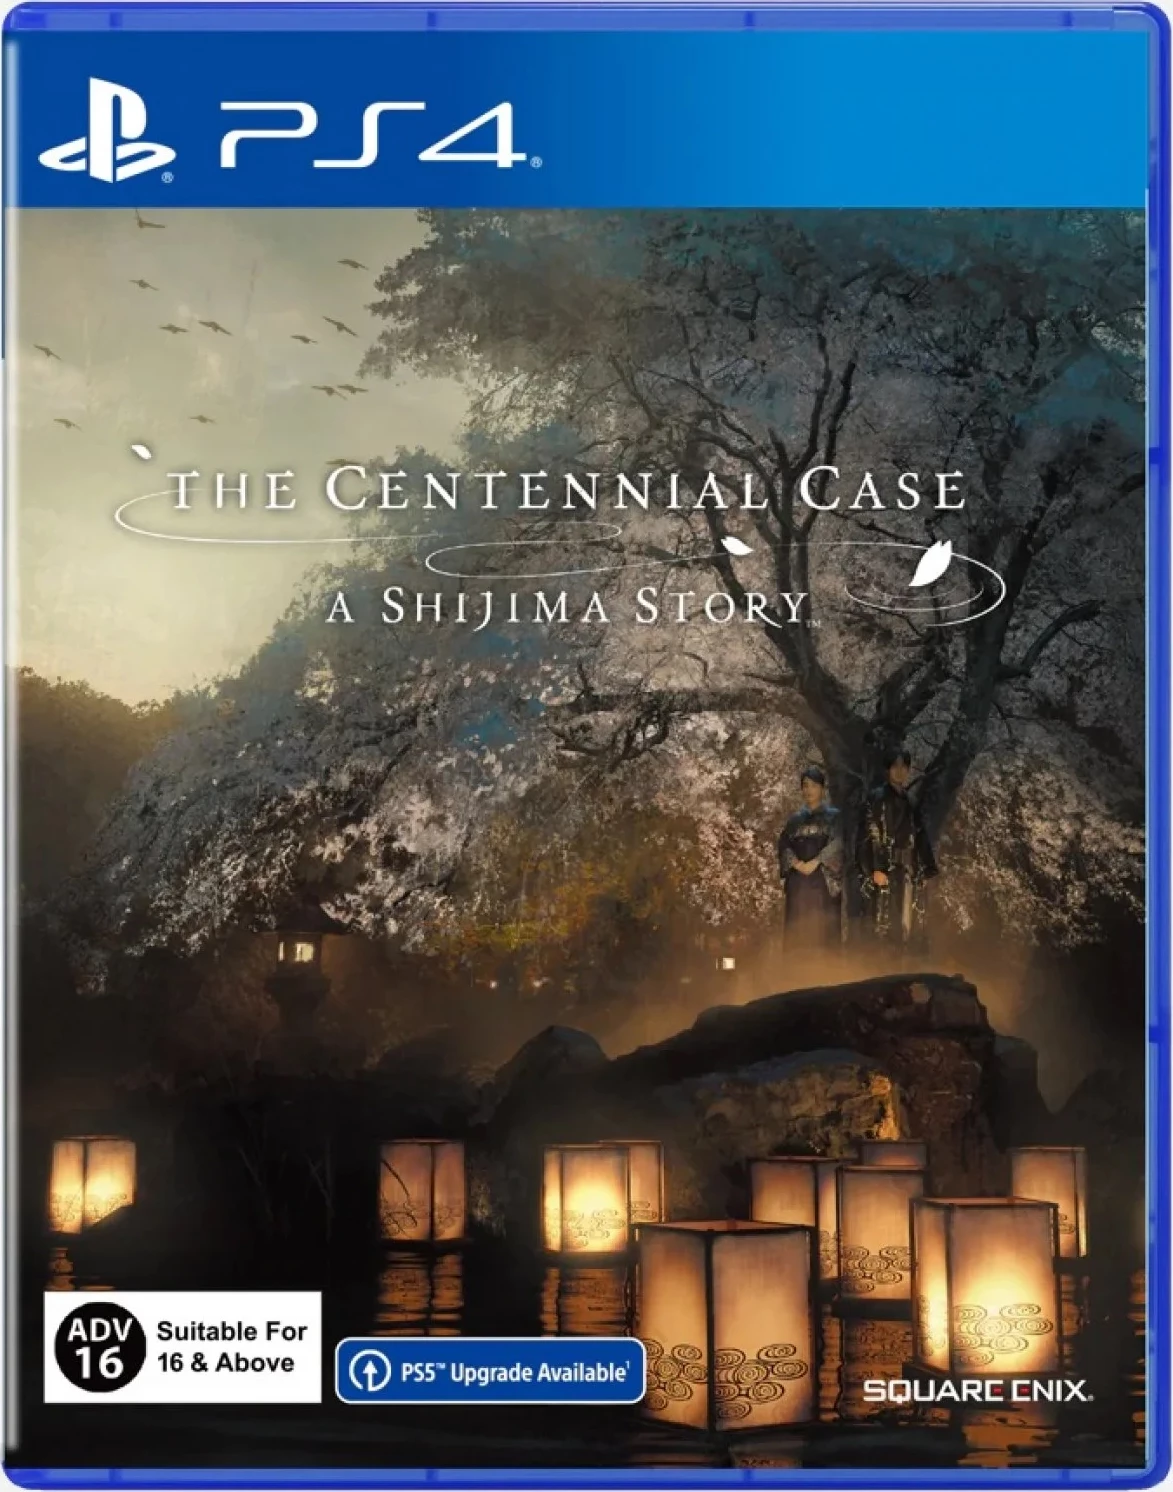 The Centennial Case: A Shijima Story (Asia Import) (PS4), Square Enix